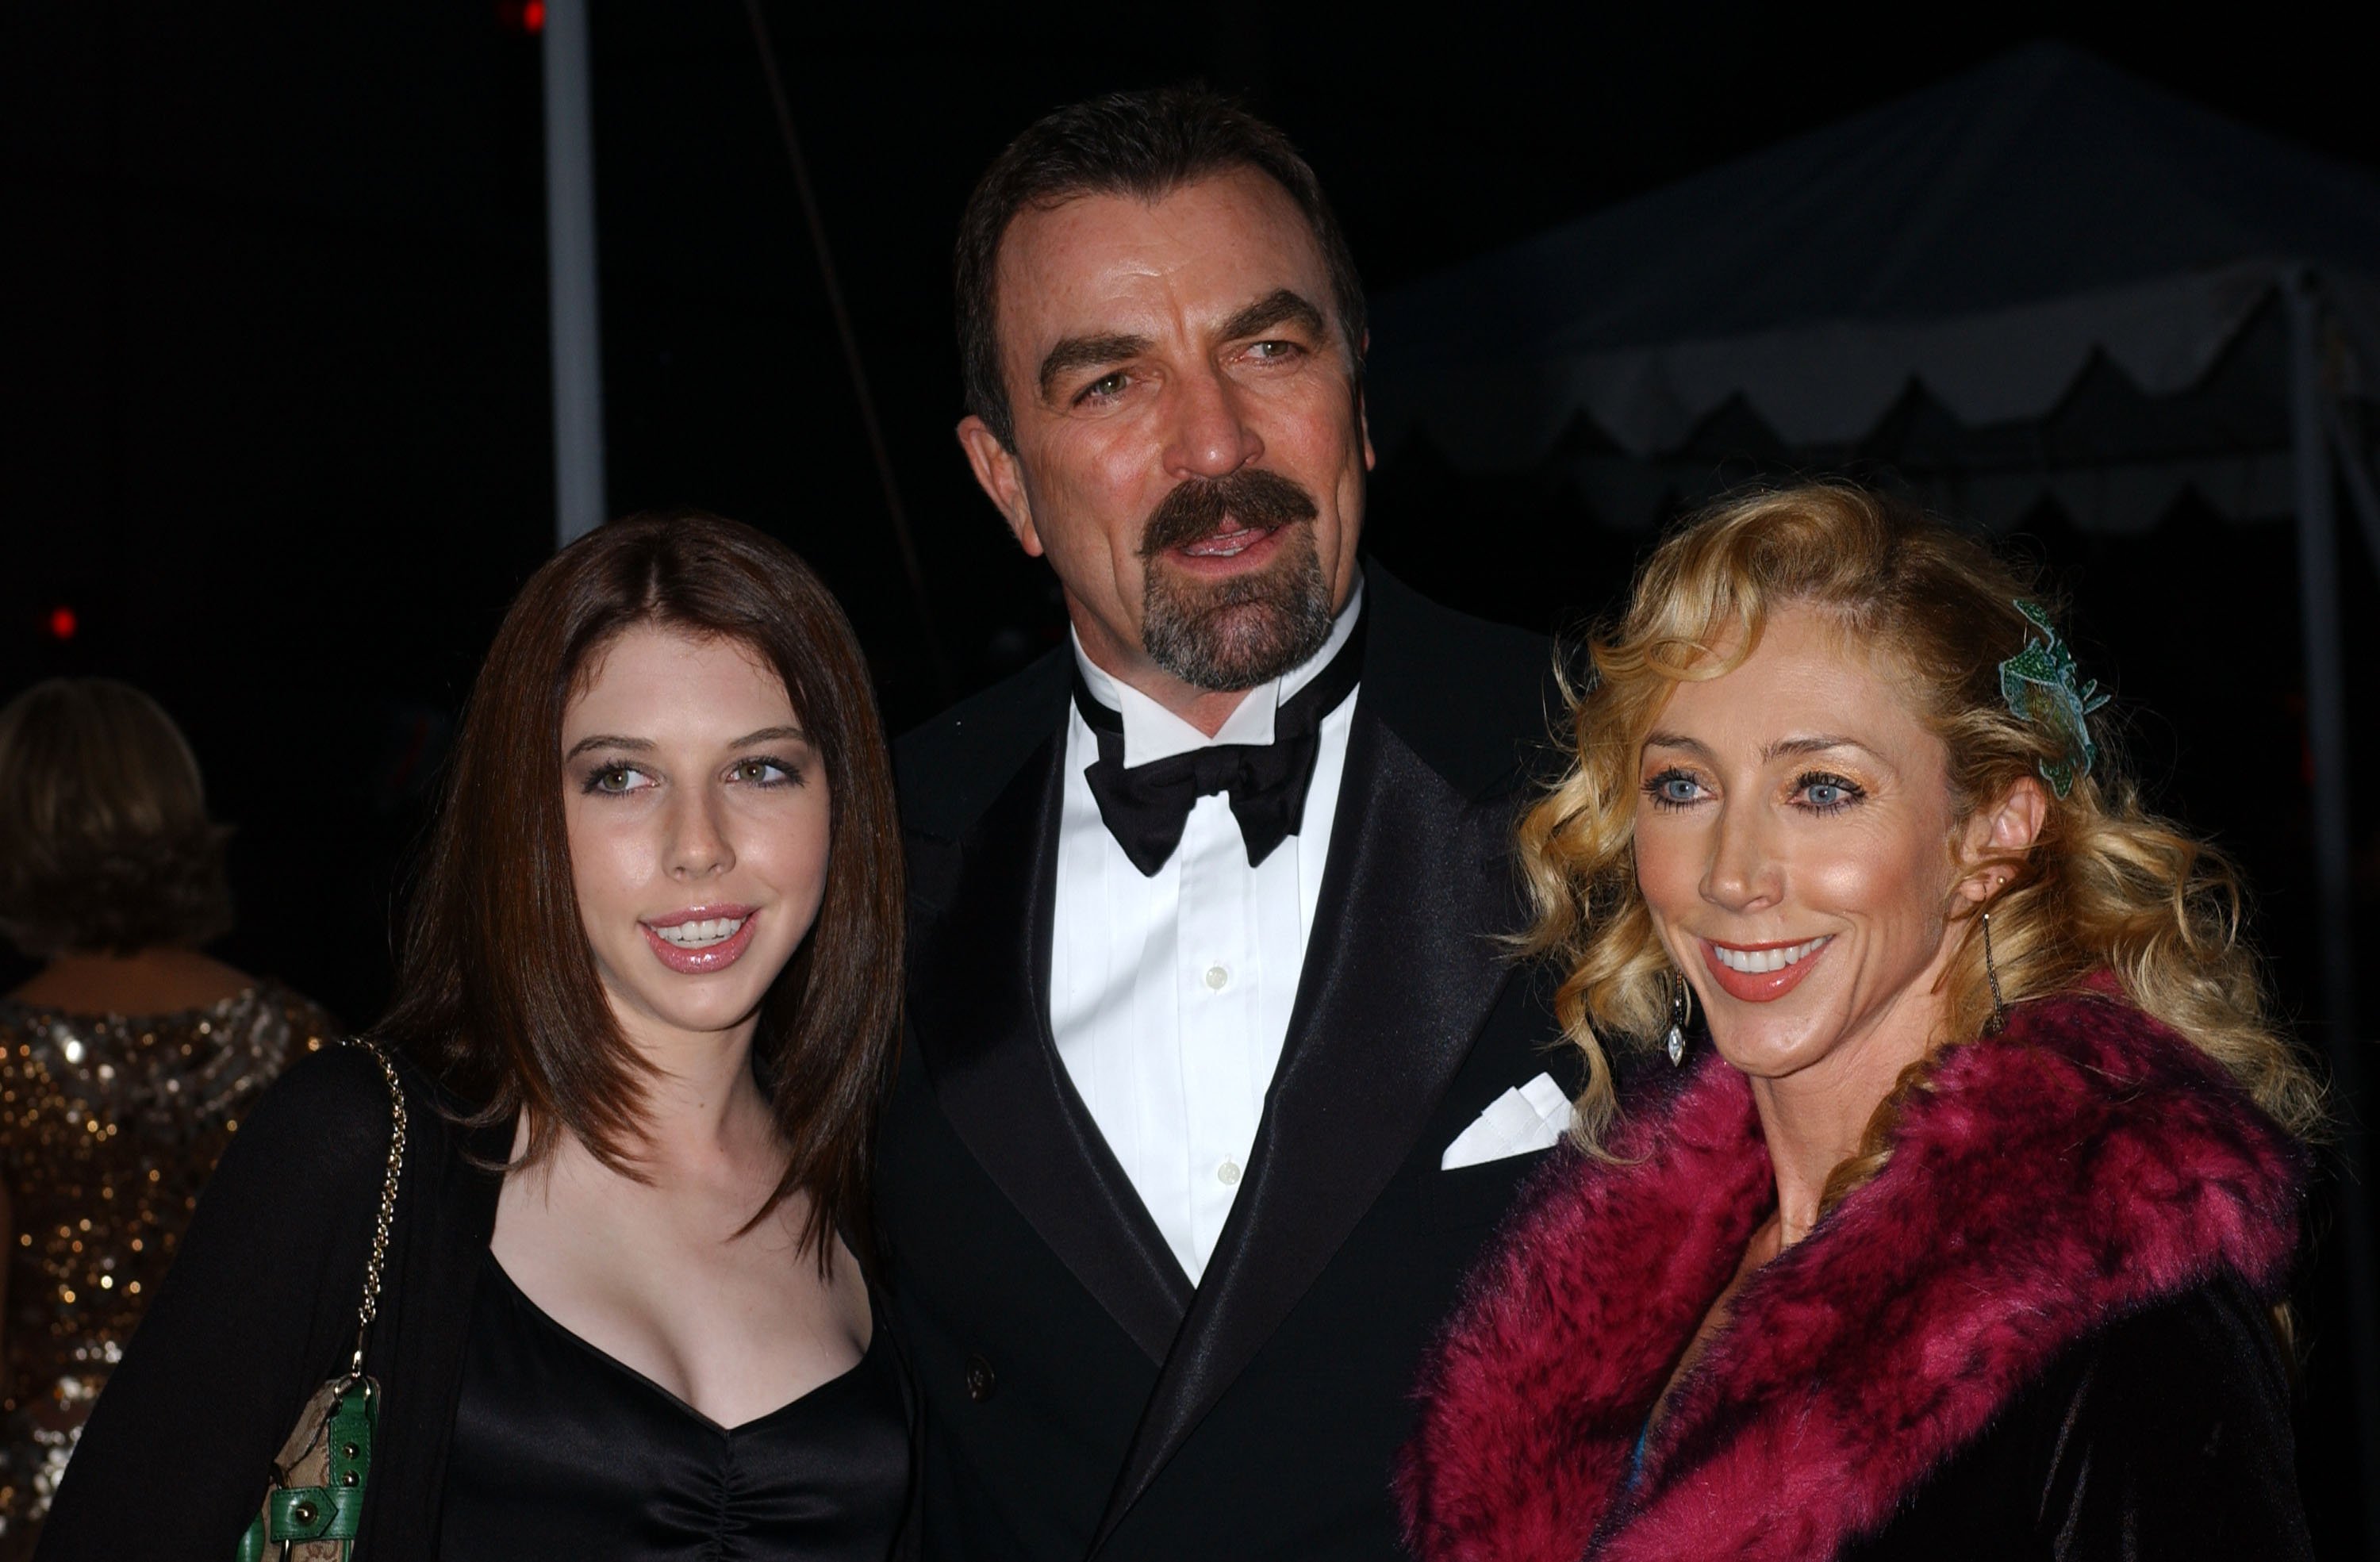 Tom Selleck, daugher Hannah and wife Jillie Mack attend the 31st Annual People's Choice Awards | Source: Getty Images